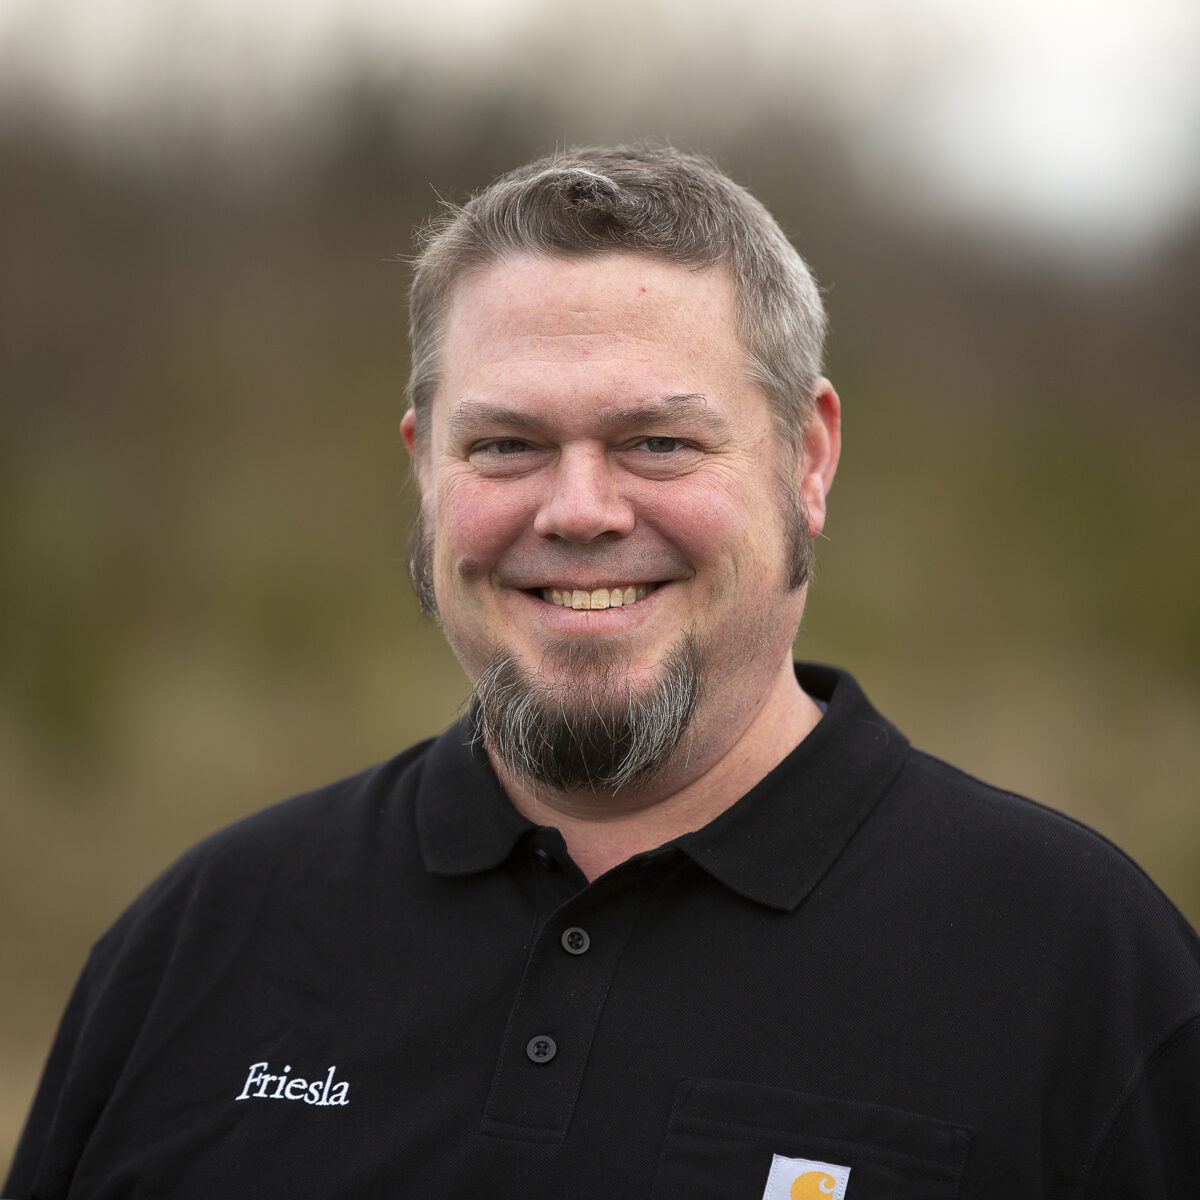 Dave Hofford, Friesla Technical Manager